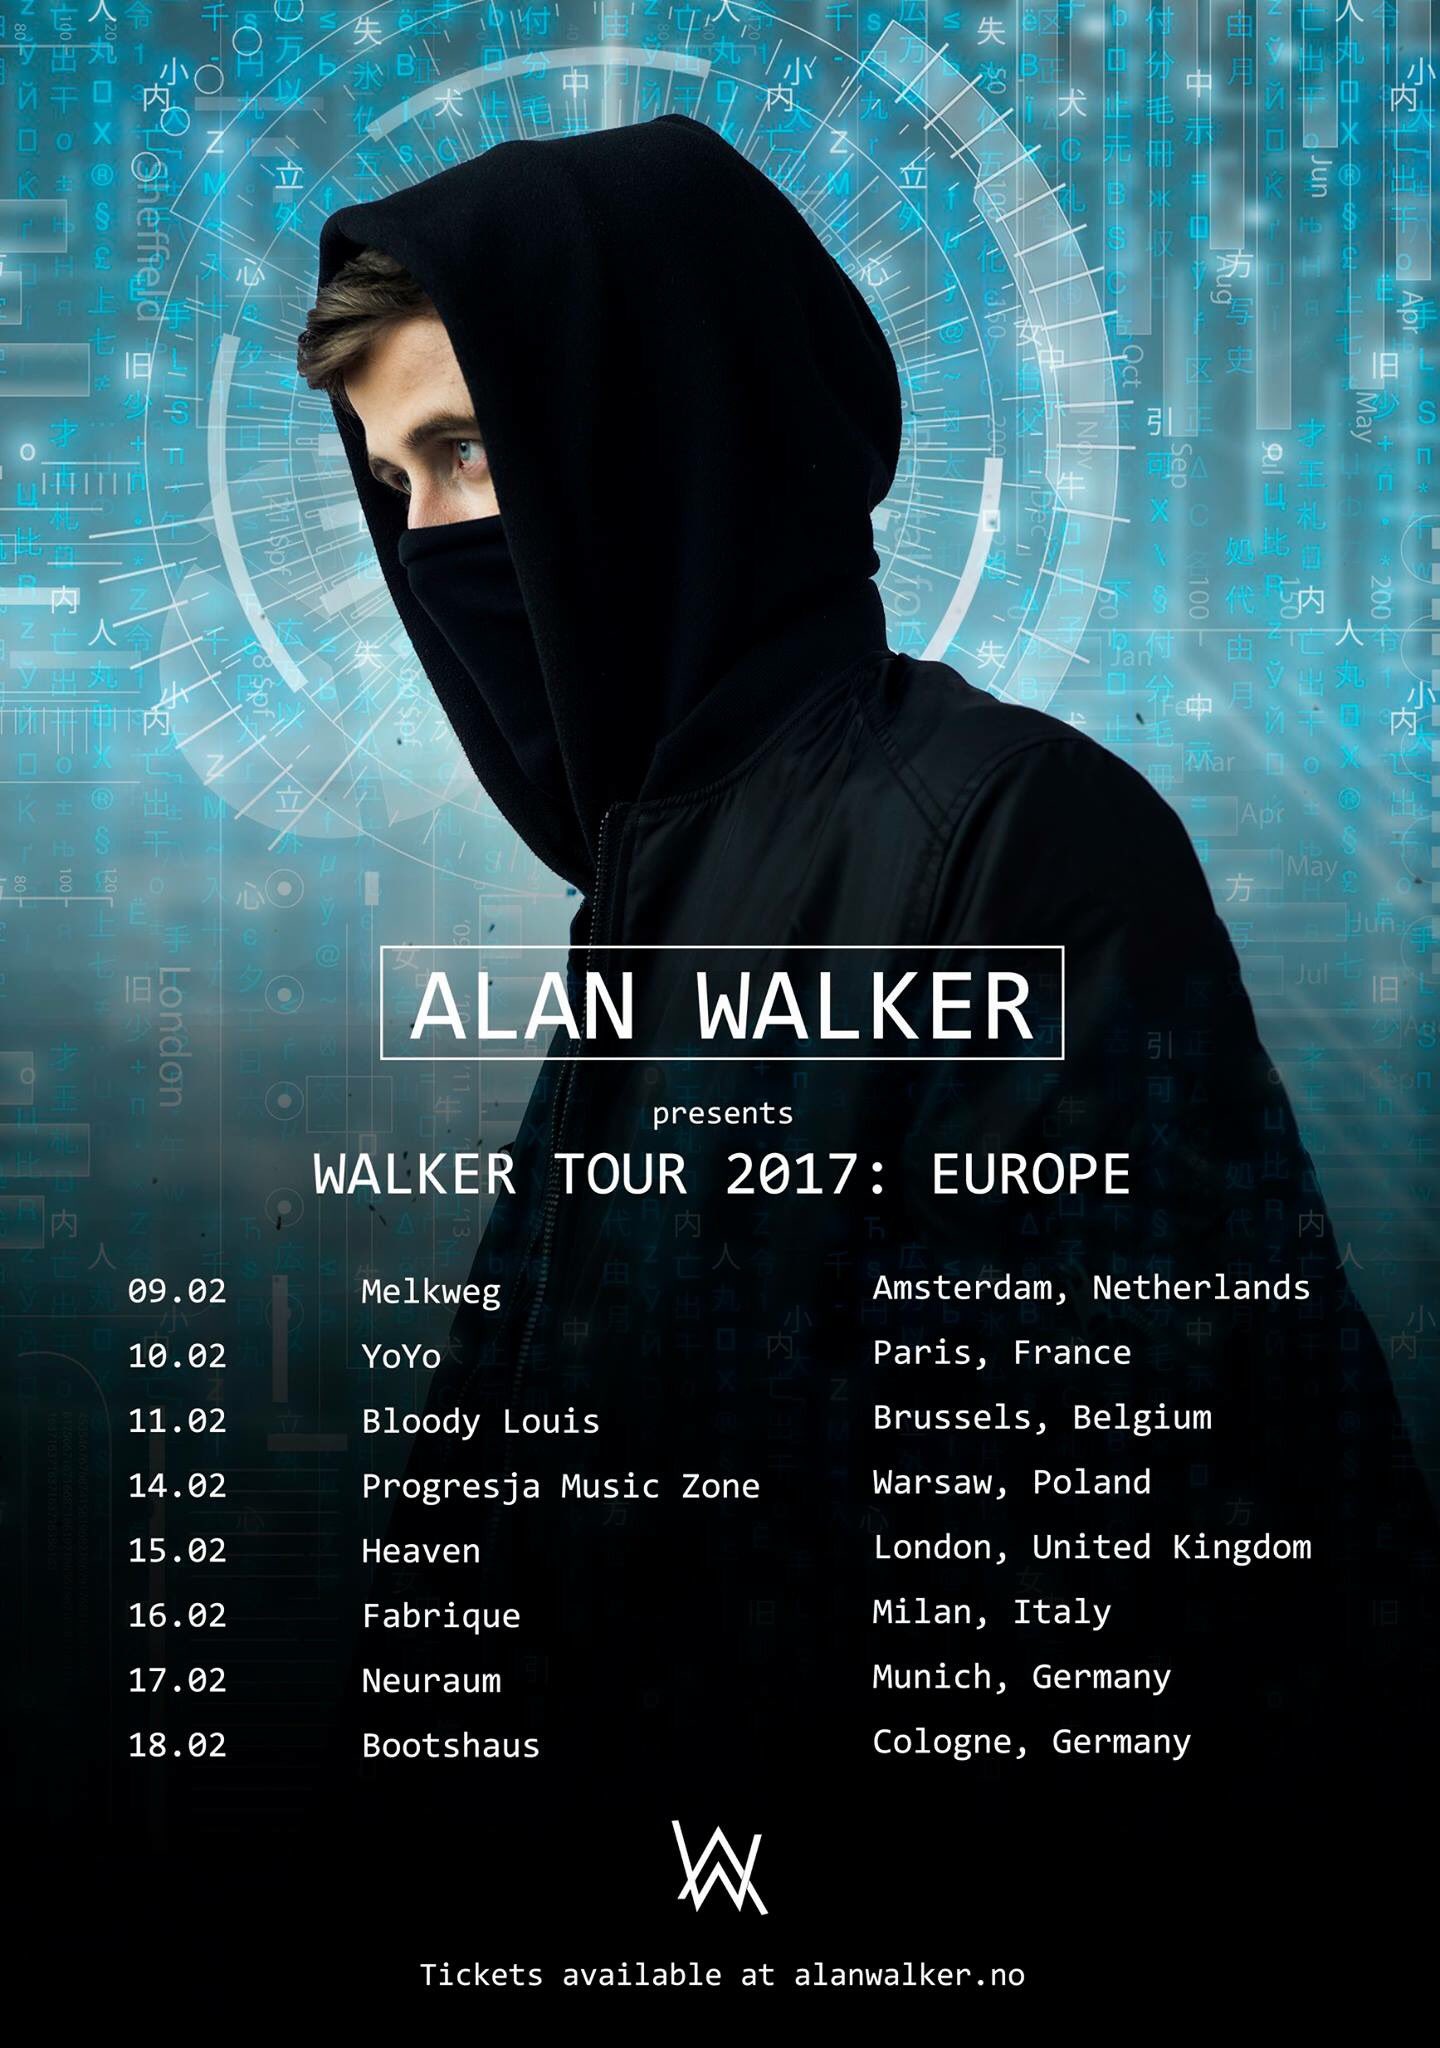 Alan Walker: From Bedroom Producer to Official Sia Remixer